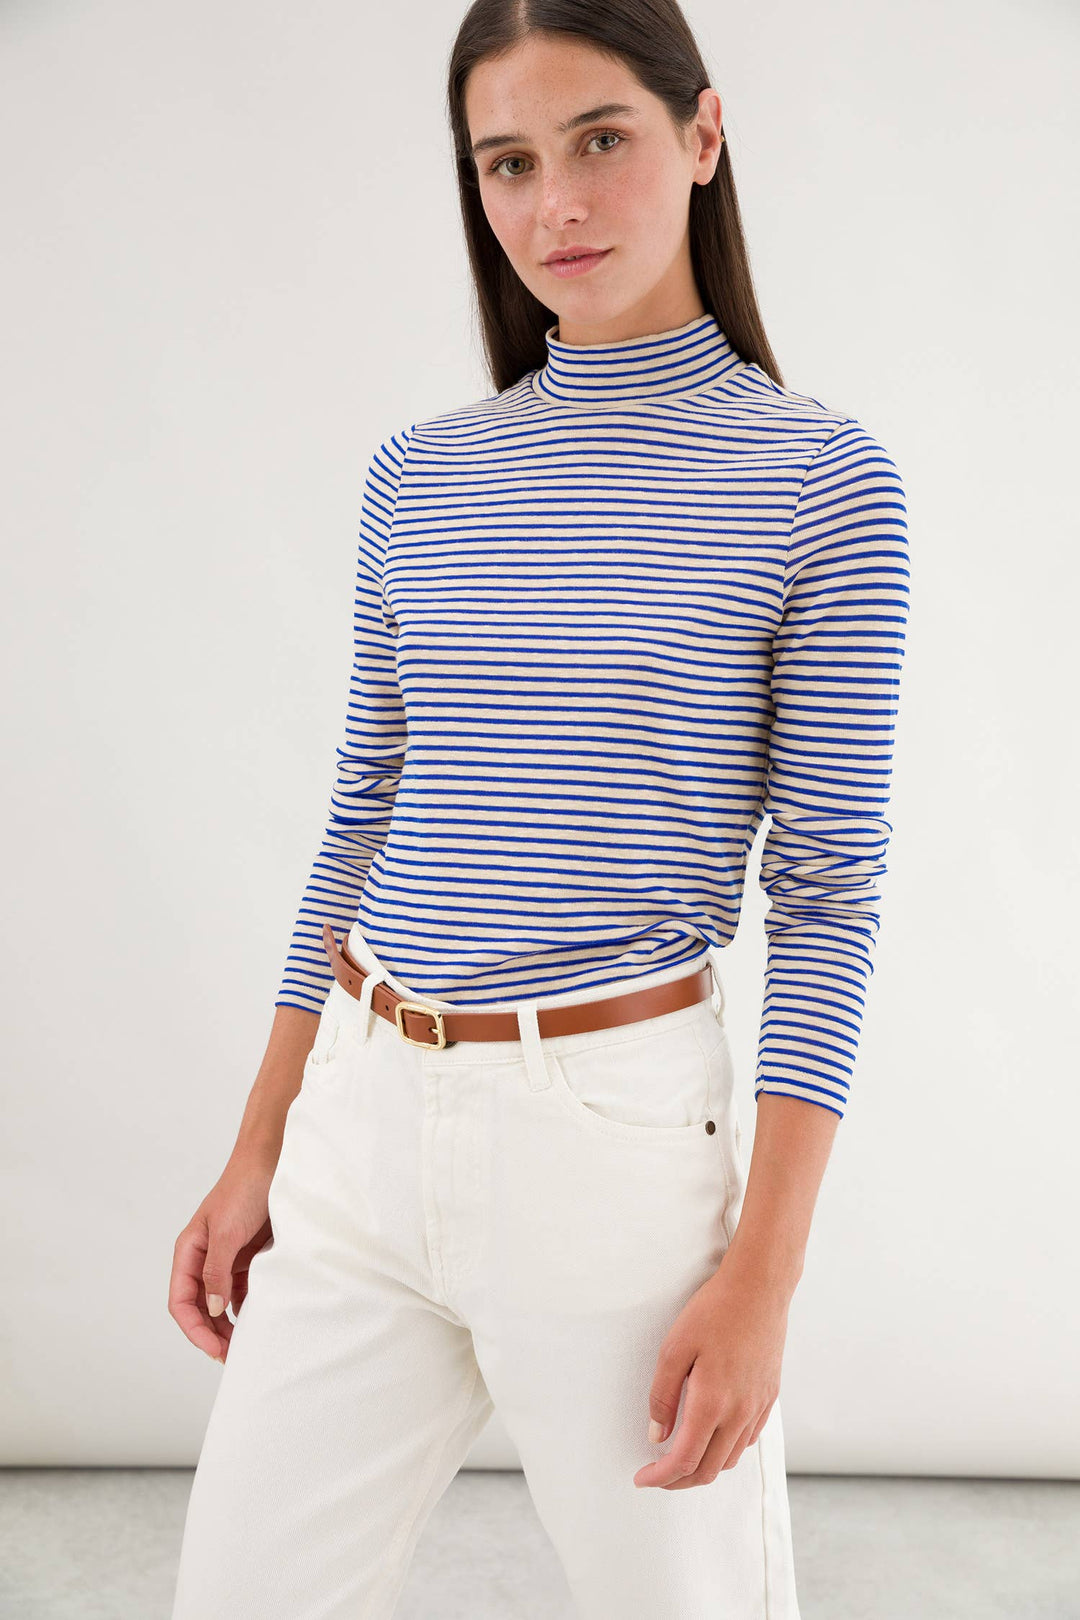 Striped T-Shirt with High Collar - Tan and Blue Sparkle